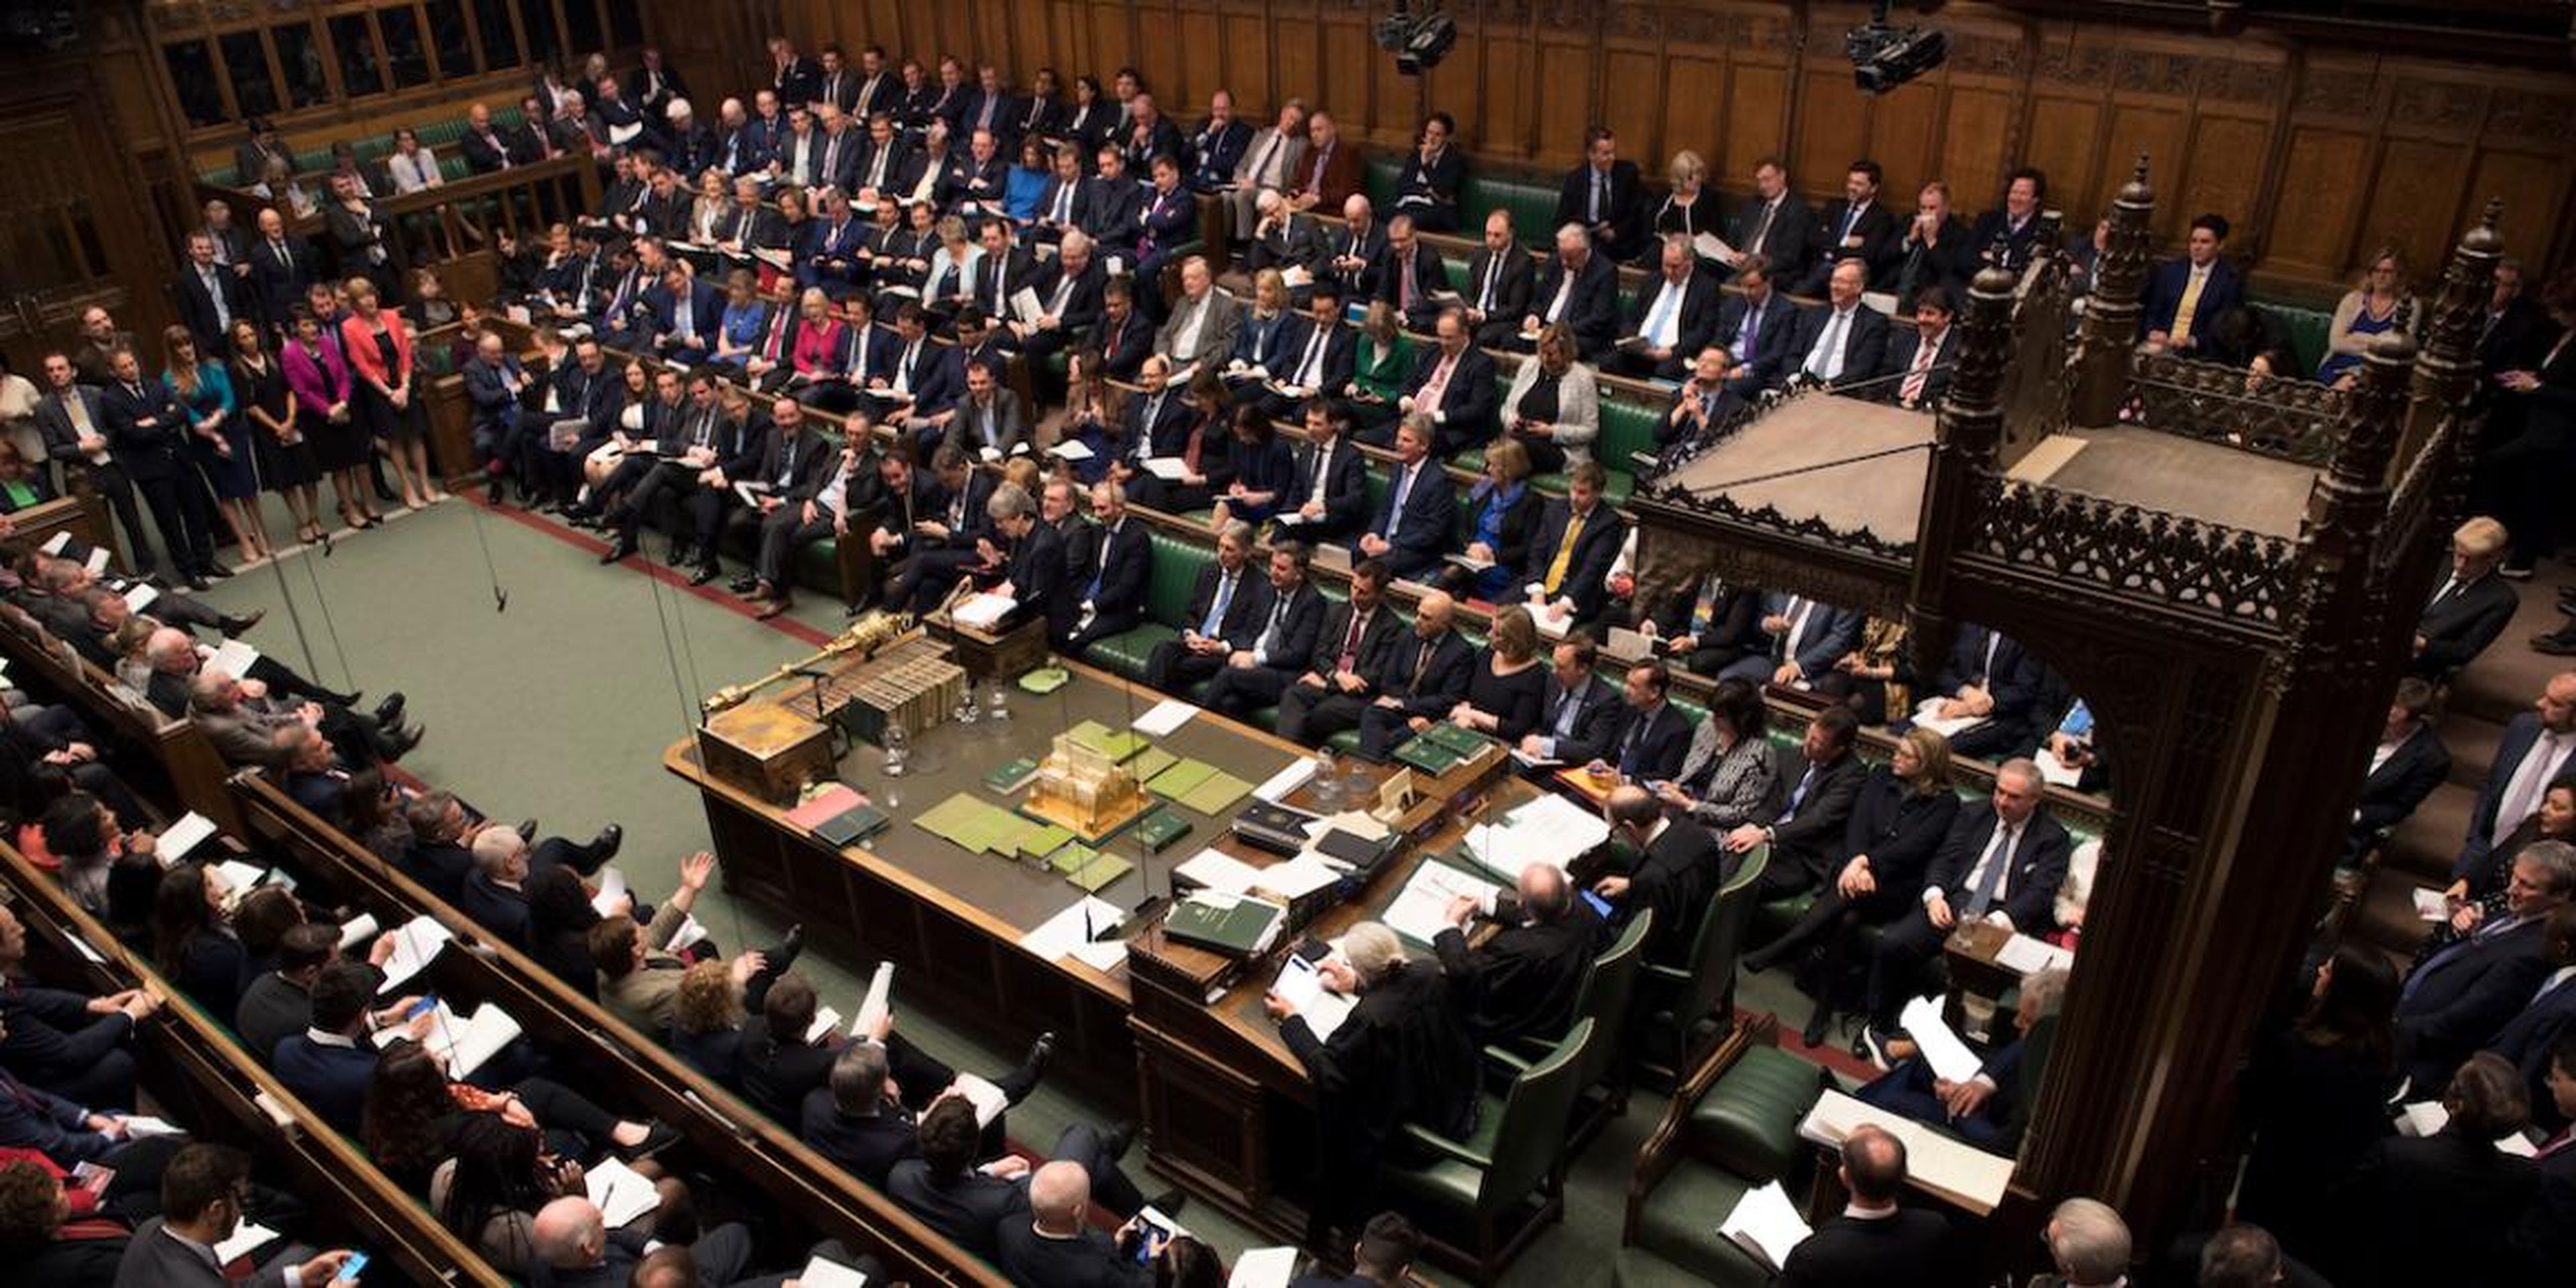 MPs debate a series of so-called indicative votes on Brexit in the House of Commons on Wednesday.